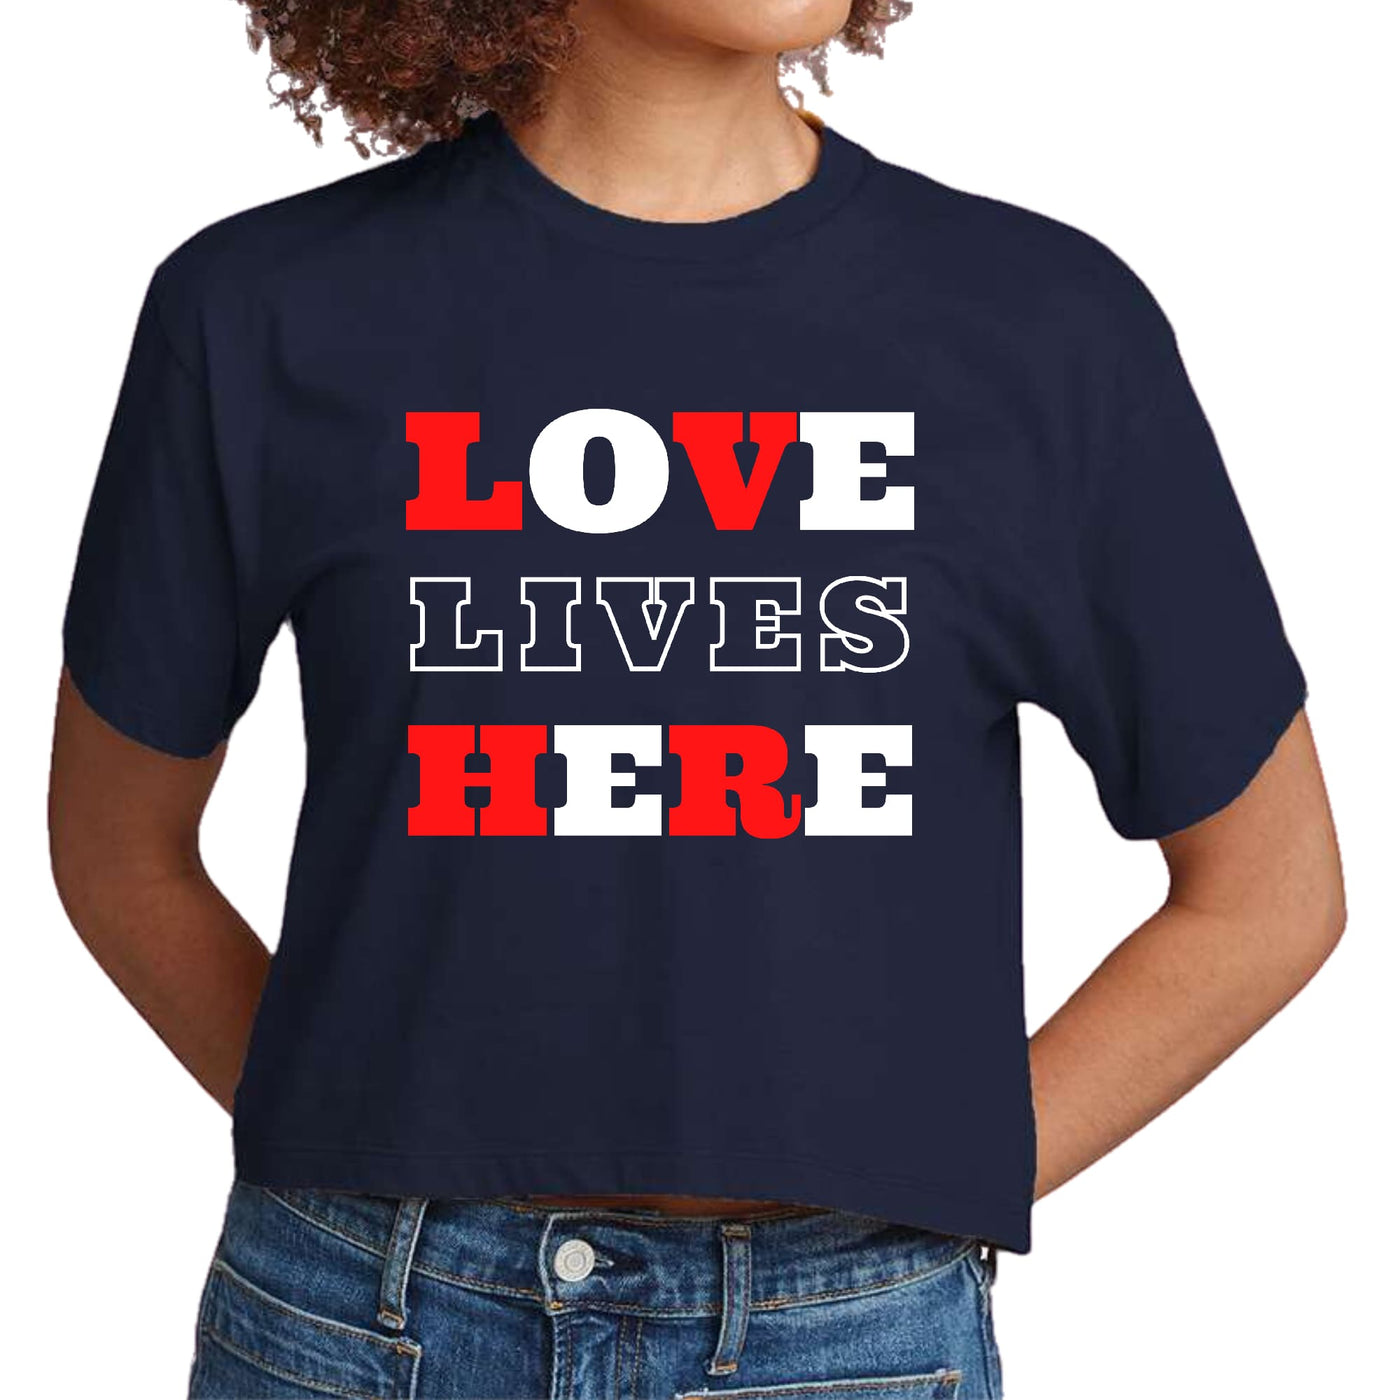 Womens Cropped Graphic T-shirt Love Lives Here Christian Inspiration - Womens